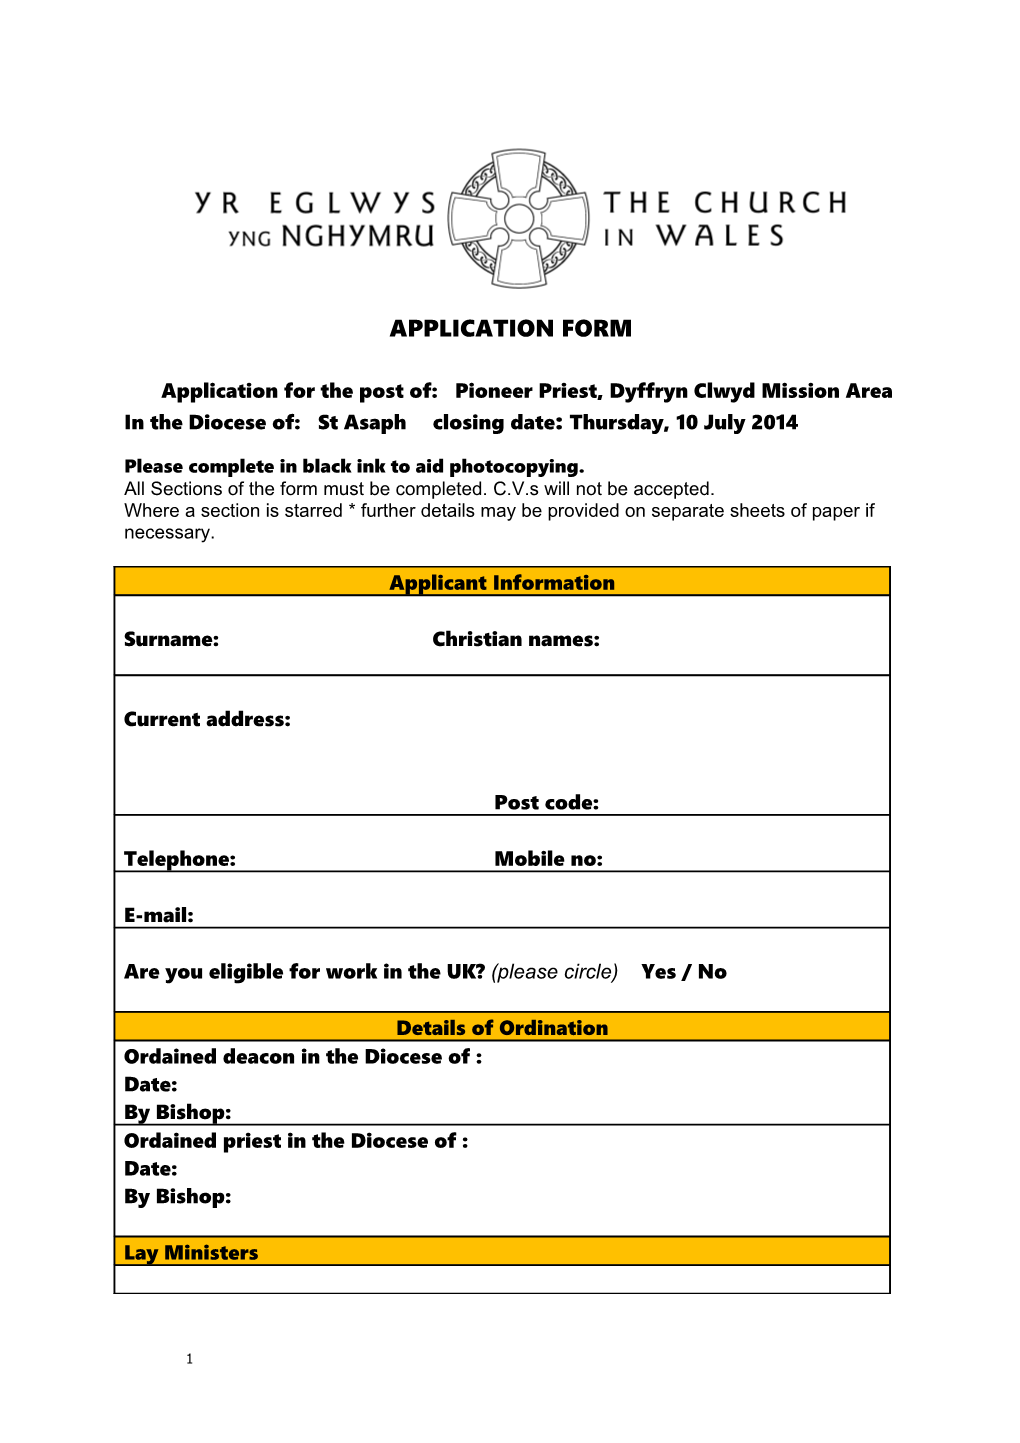 Application for the Post Of: Pioneer Priest, Dyffryn Clwyd Mission Area